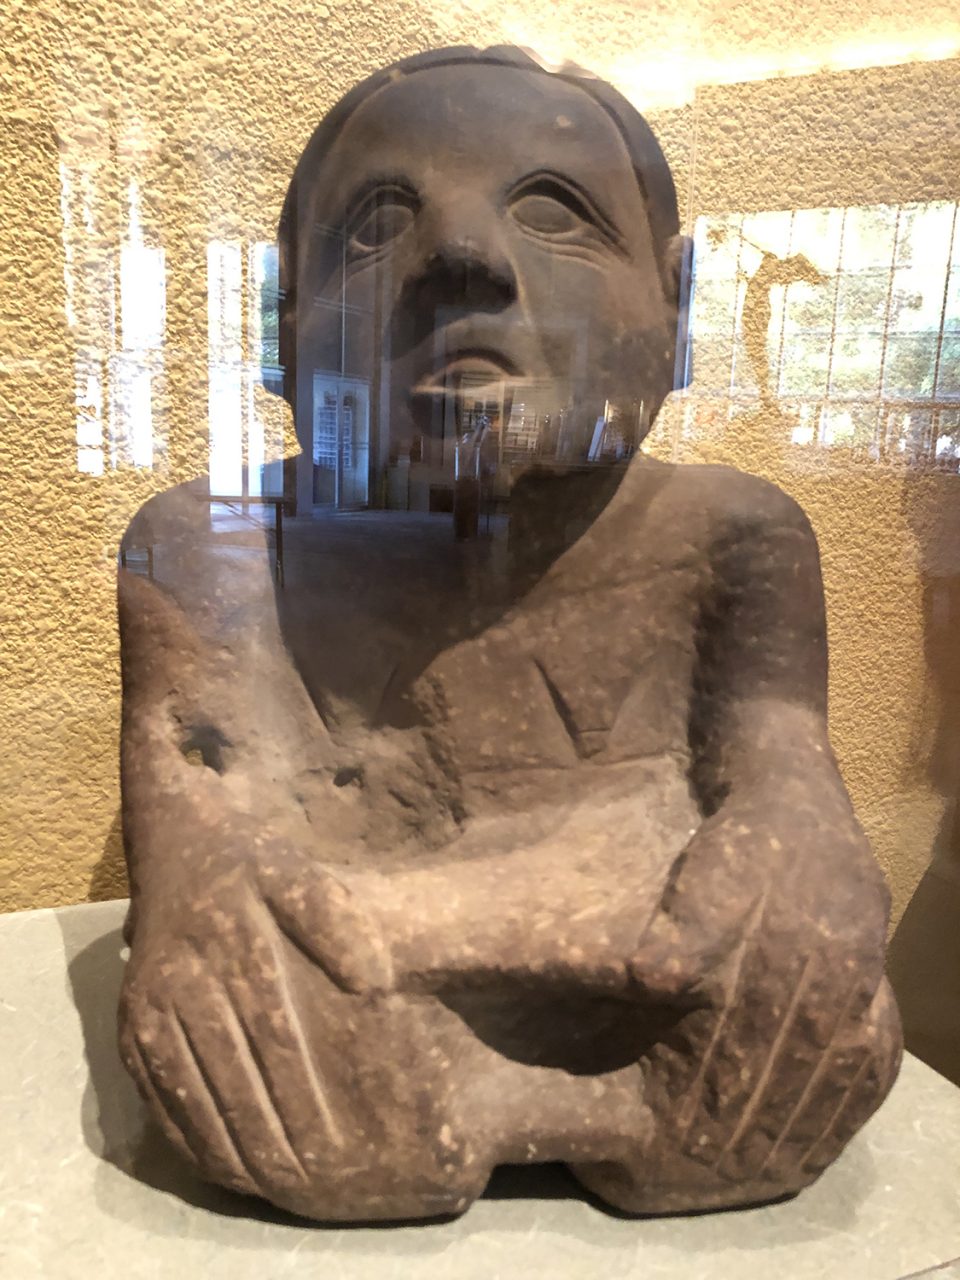 The female of the pair is carved of darker stone. Doesn't she have a sweet-natured, grandmotherly look in her eyes? The wrinkles and drooping breasts are indicators of age (wisdom?). The drilled holes may have held decorations or other perishable items.